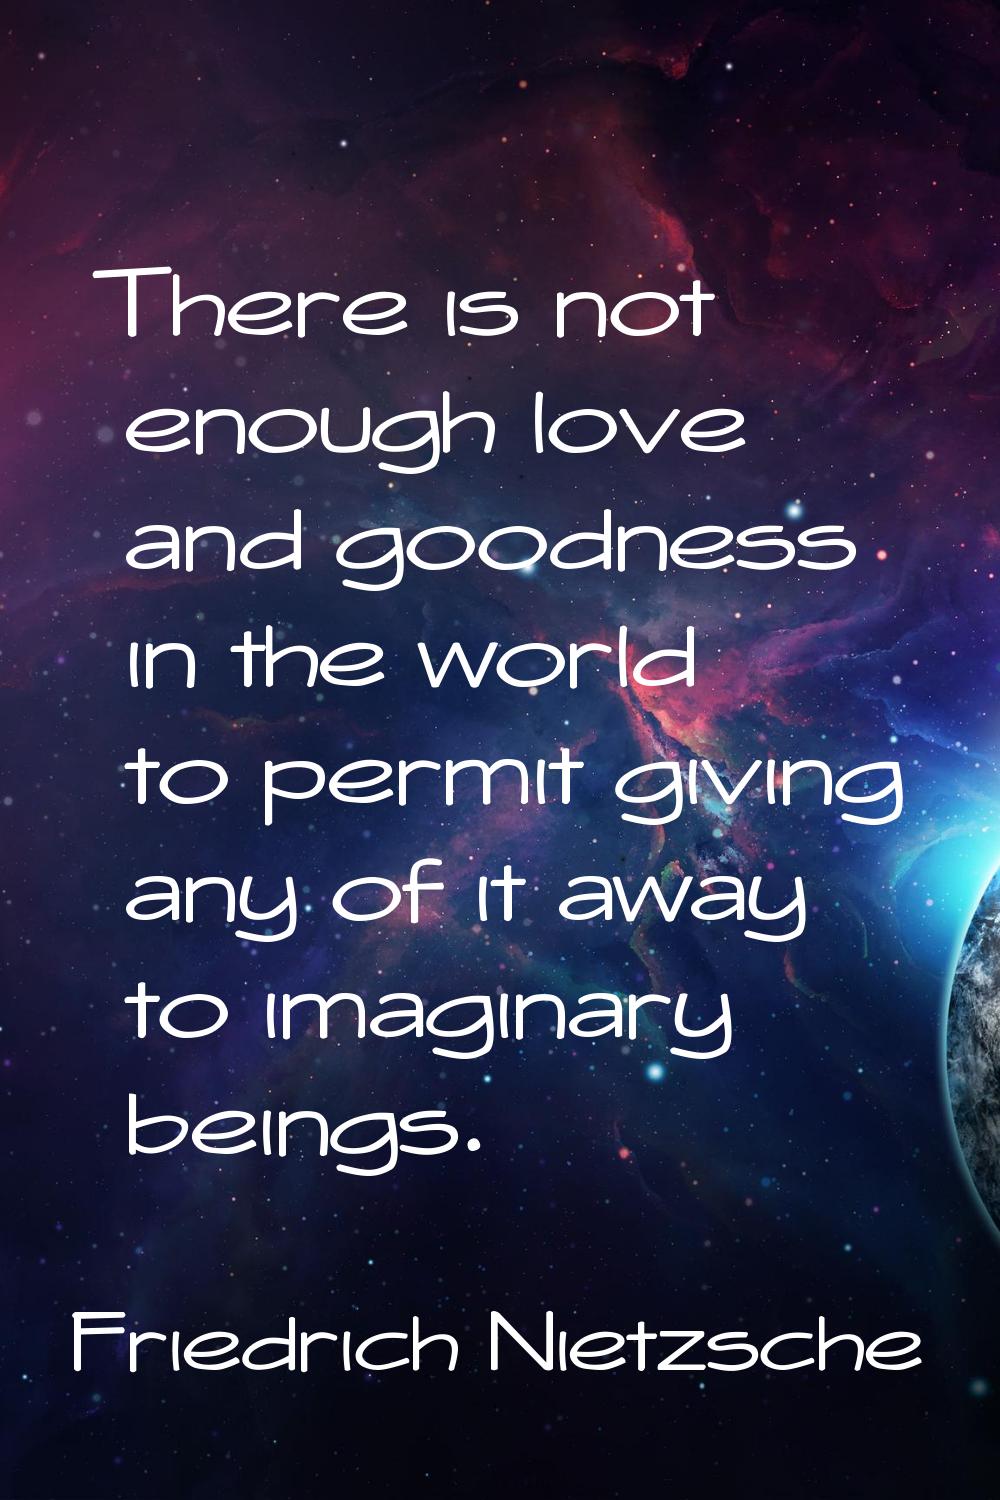 There is not enough love and goodness in the world to permit giving any of it away to imaginary bei